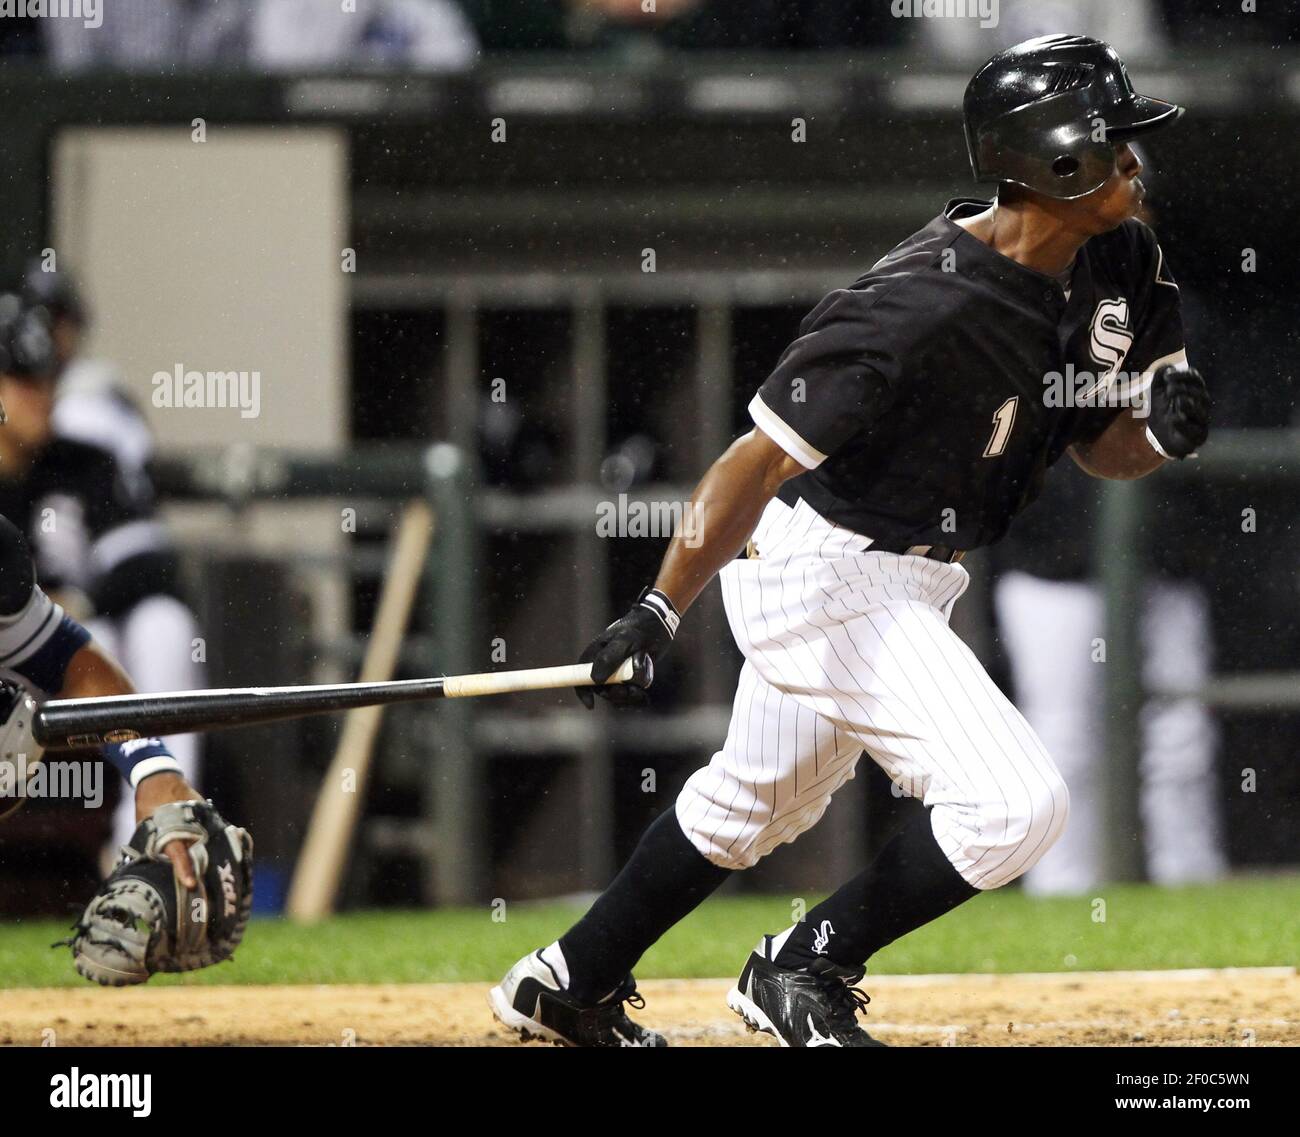 Chicago White Sox hitter Juan Pierre records his 2000 career hit